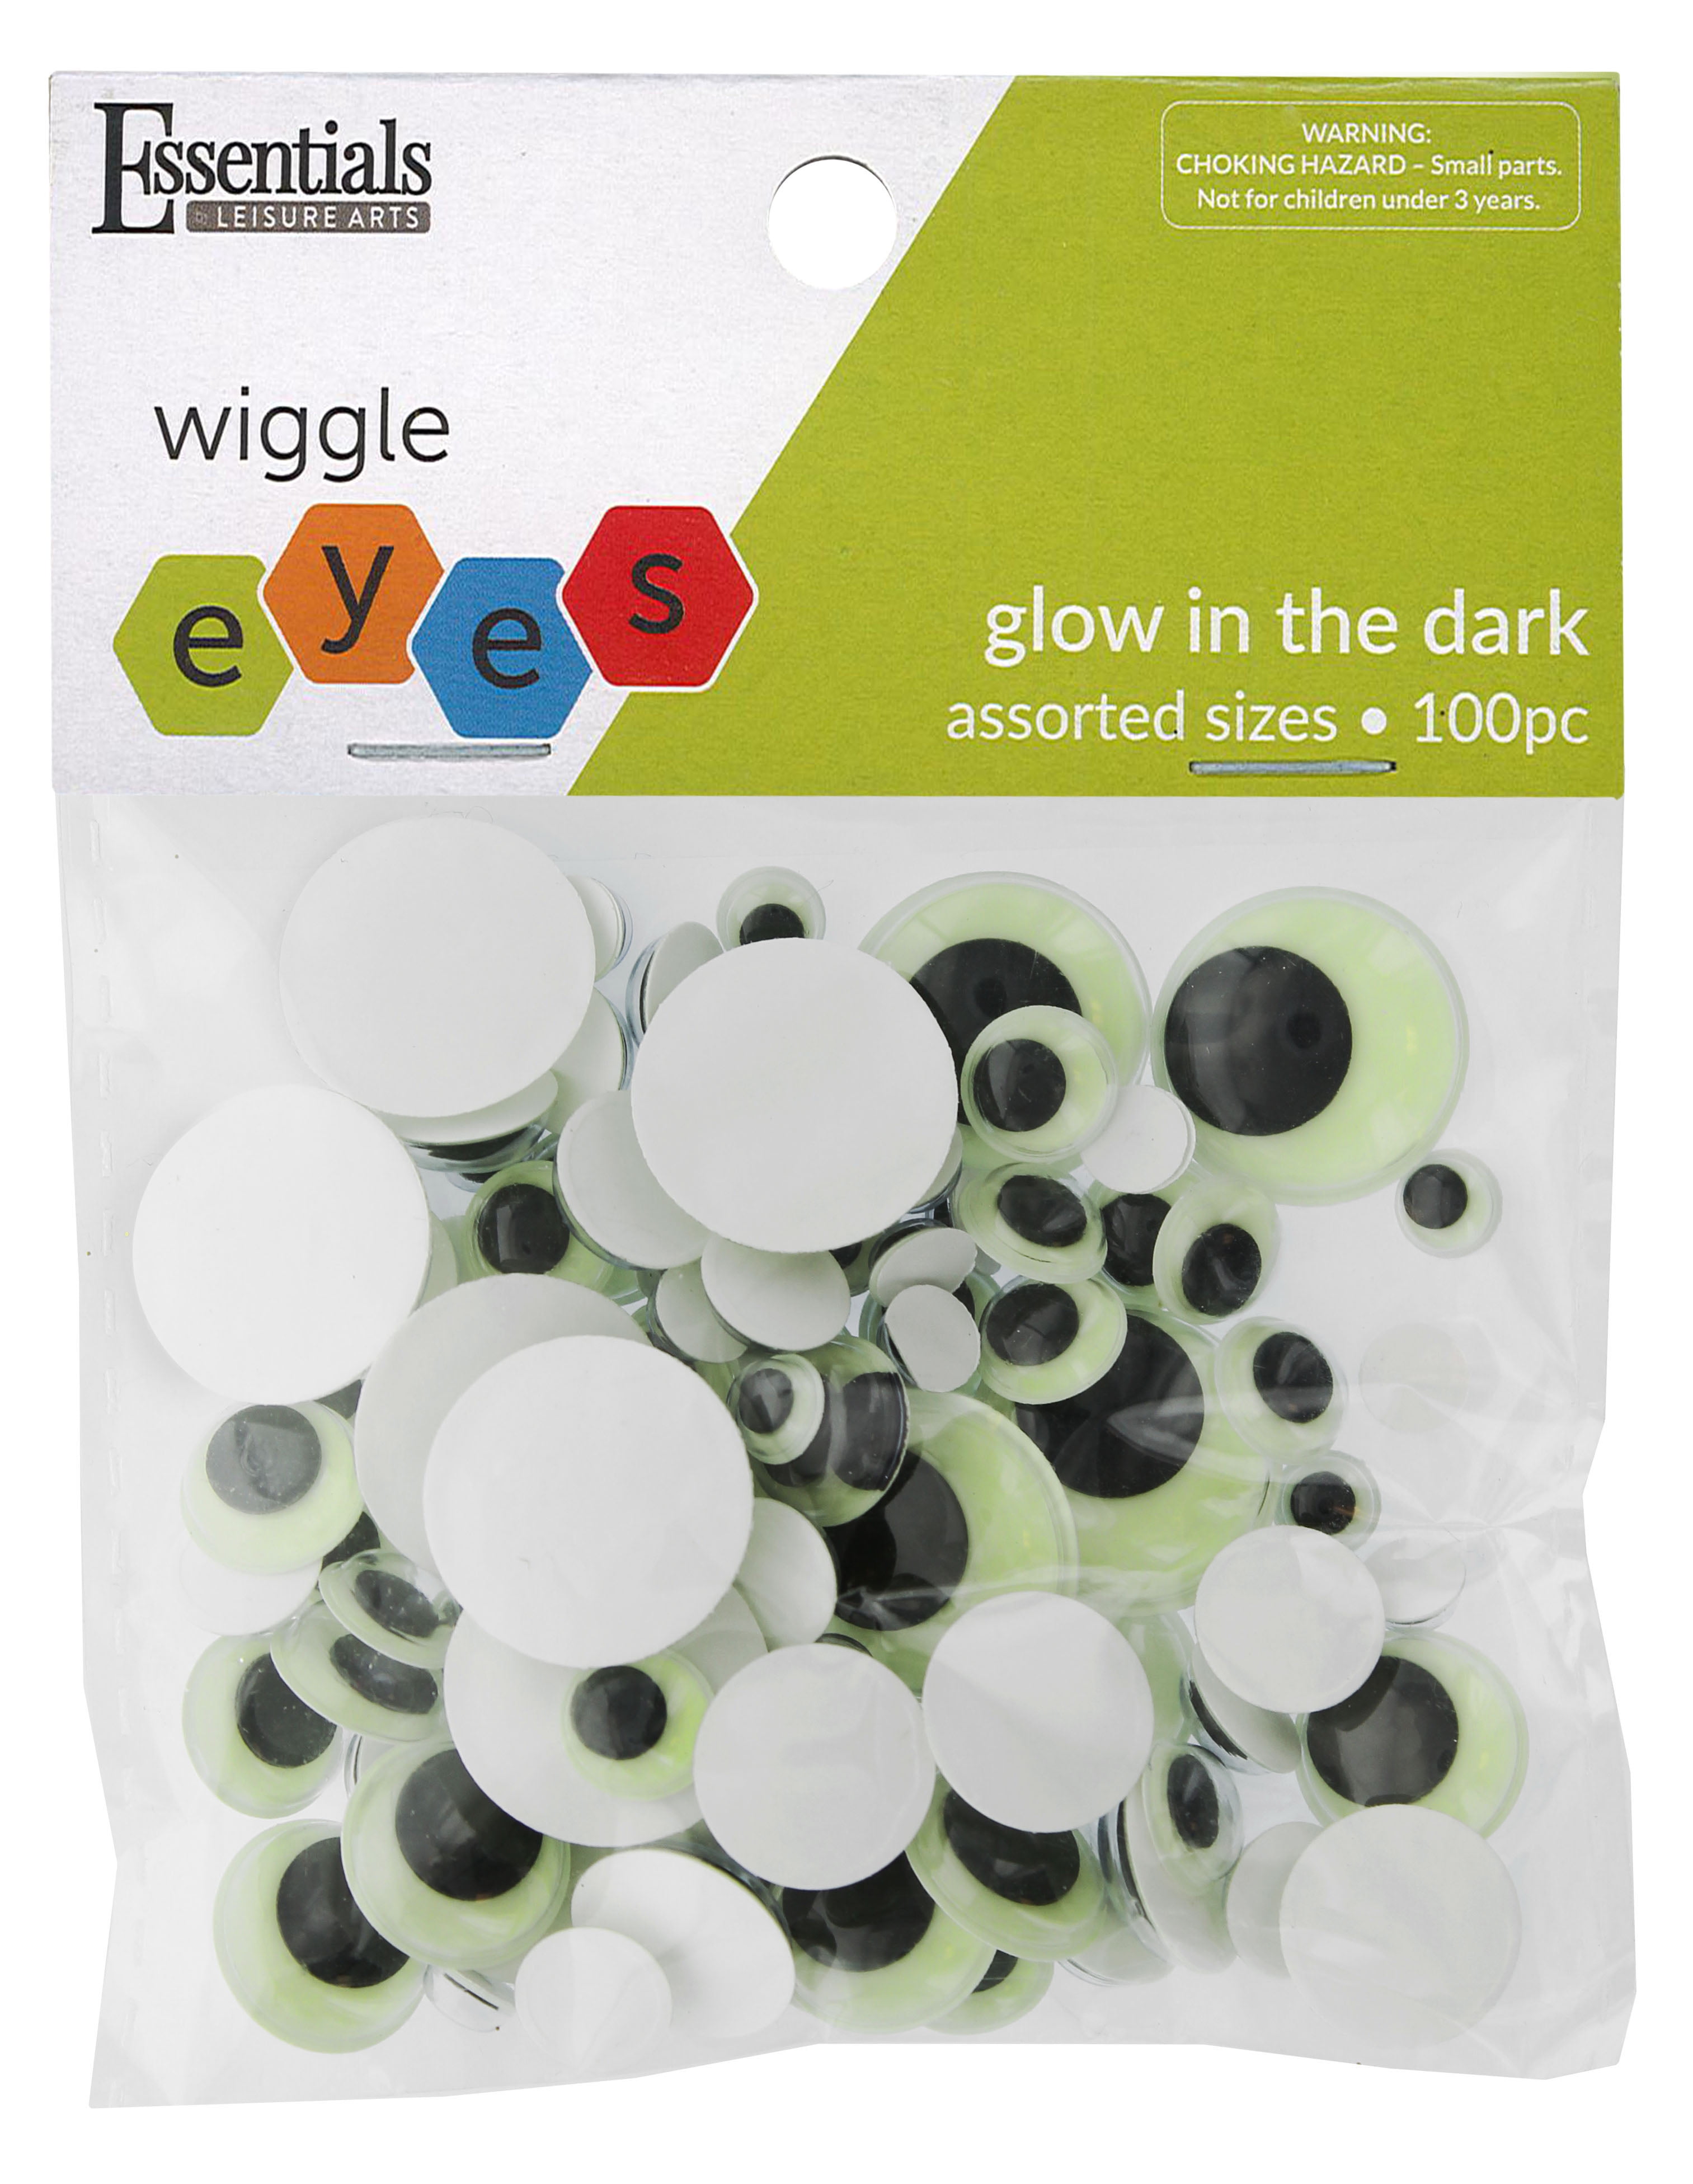 Essentials by Leisure Arts, Eye, Paste On, Moveable, Assorted, Glow in Dark, 100pc